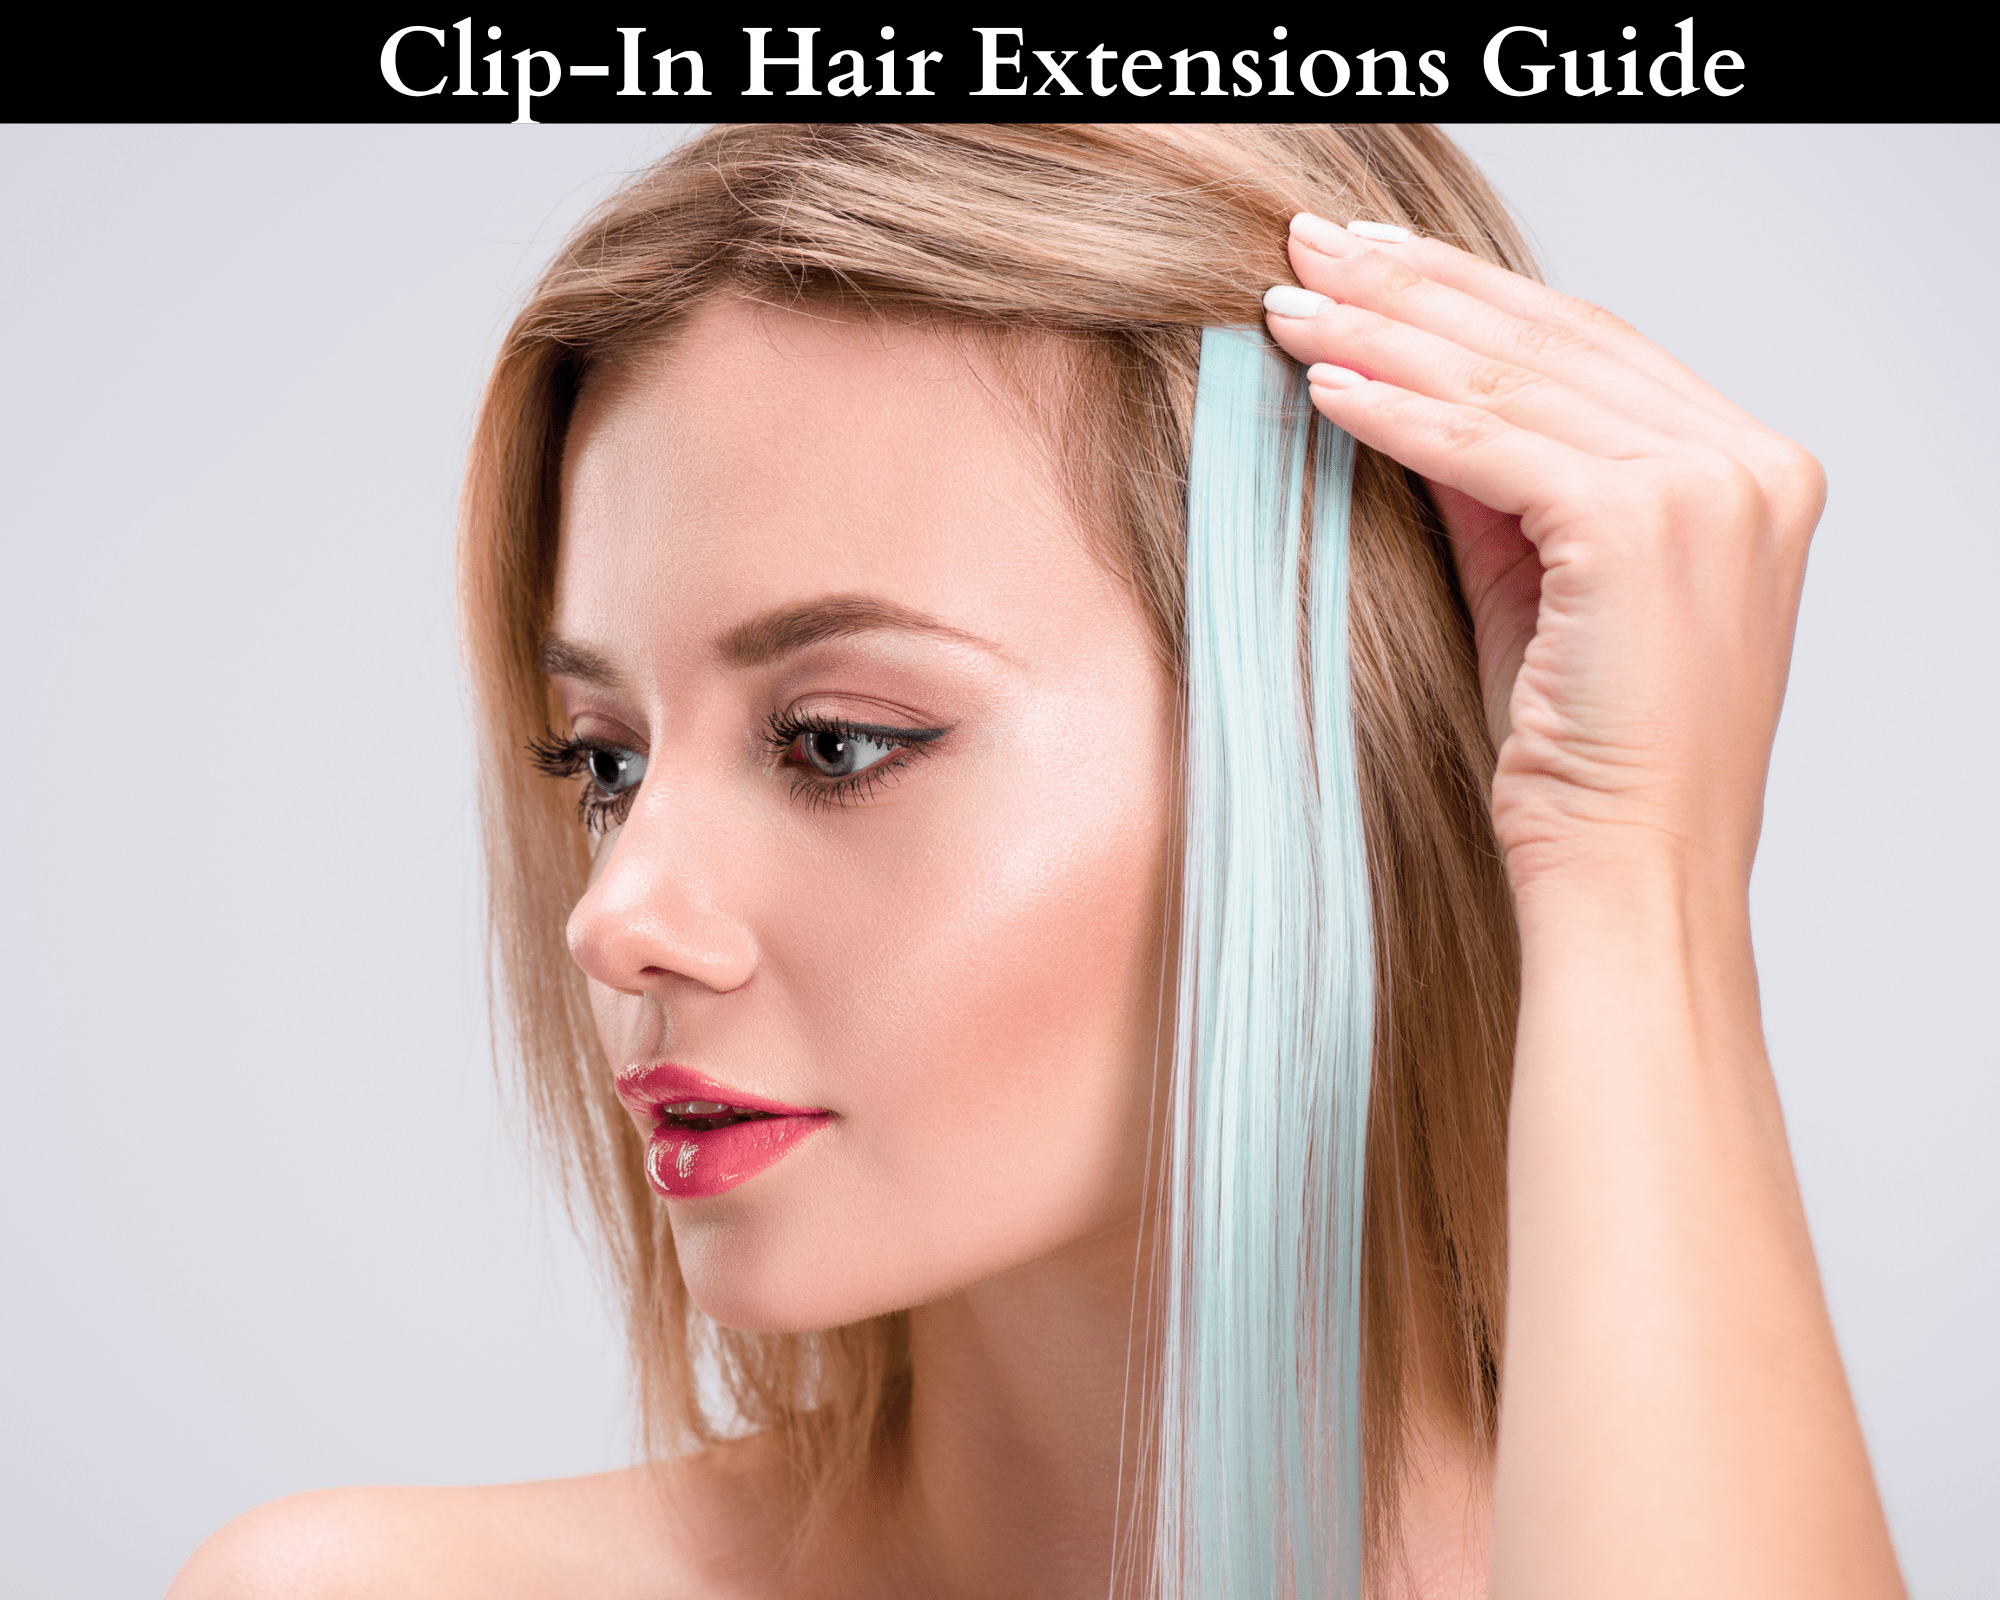 EASIEST WAY TO PUT IN CLIP-IN HAIR EXTENSIONS, GLAM SEAMLESS